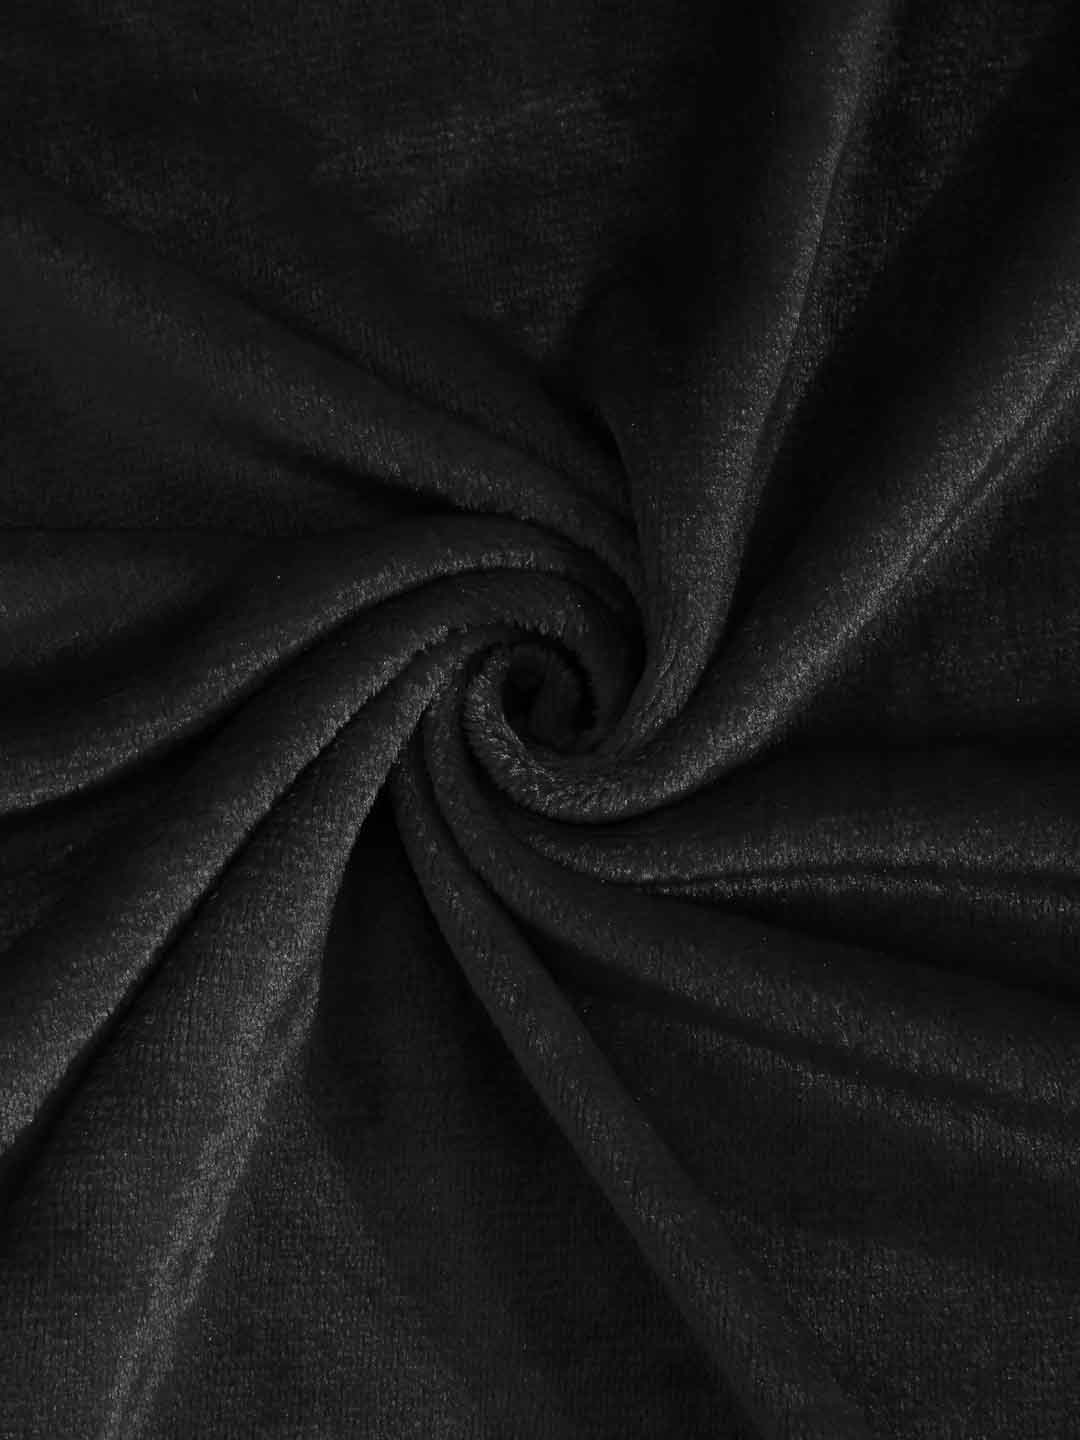 Klotthe Black Solid Woolen Double Bed Sheet with 2 Pillow Covers